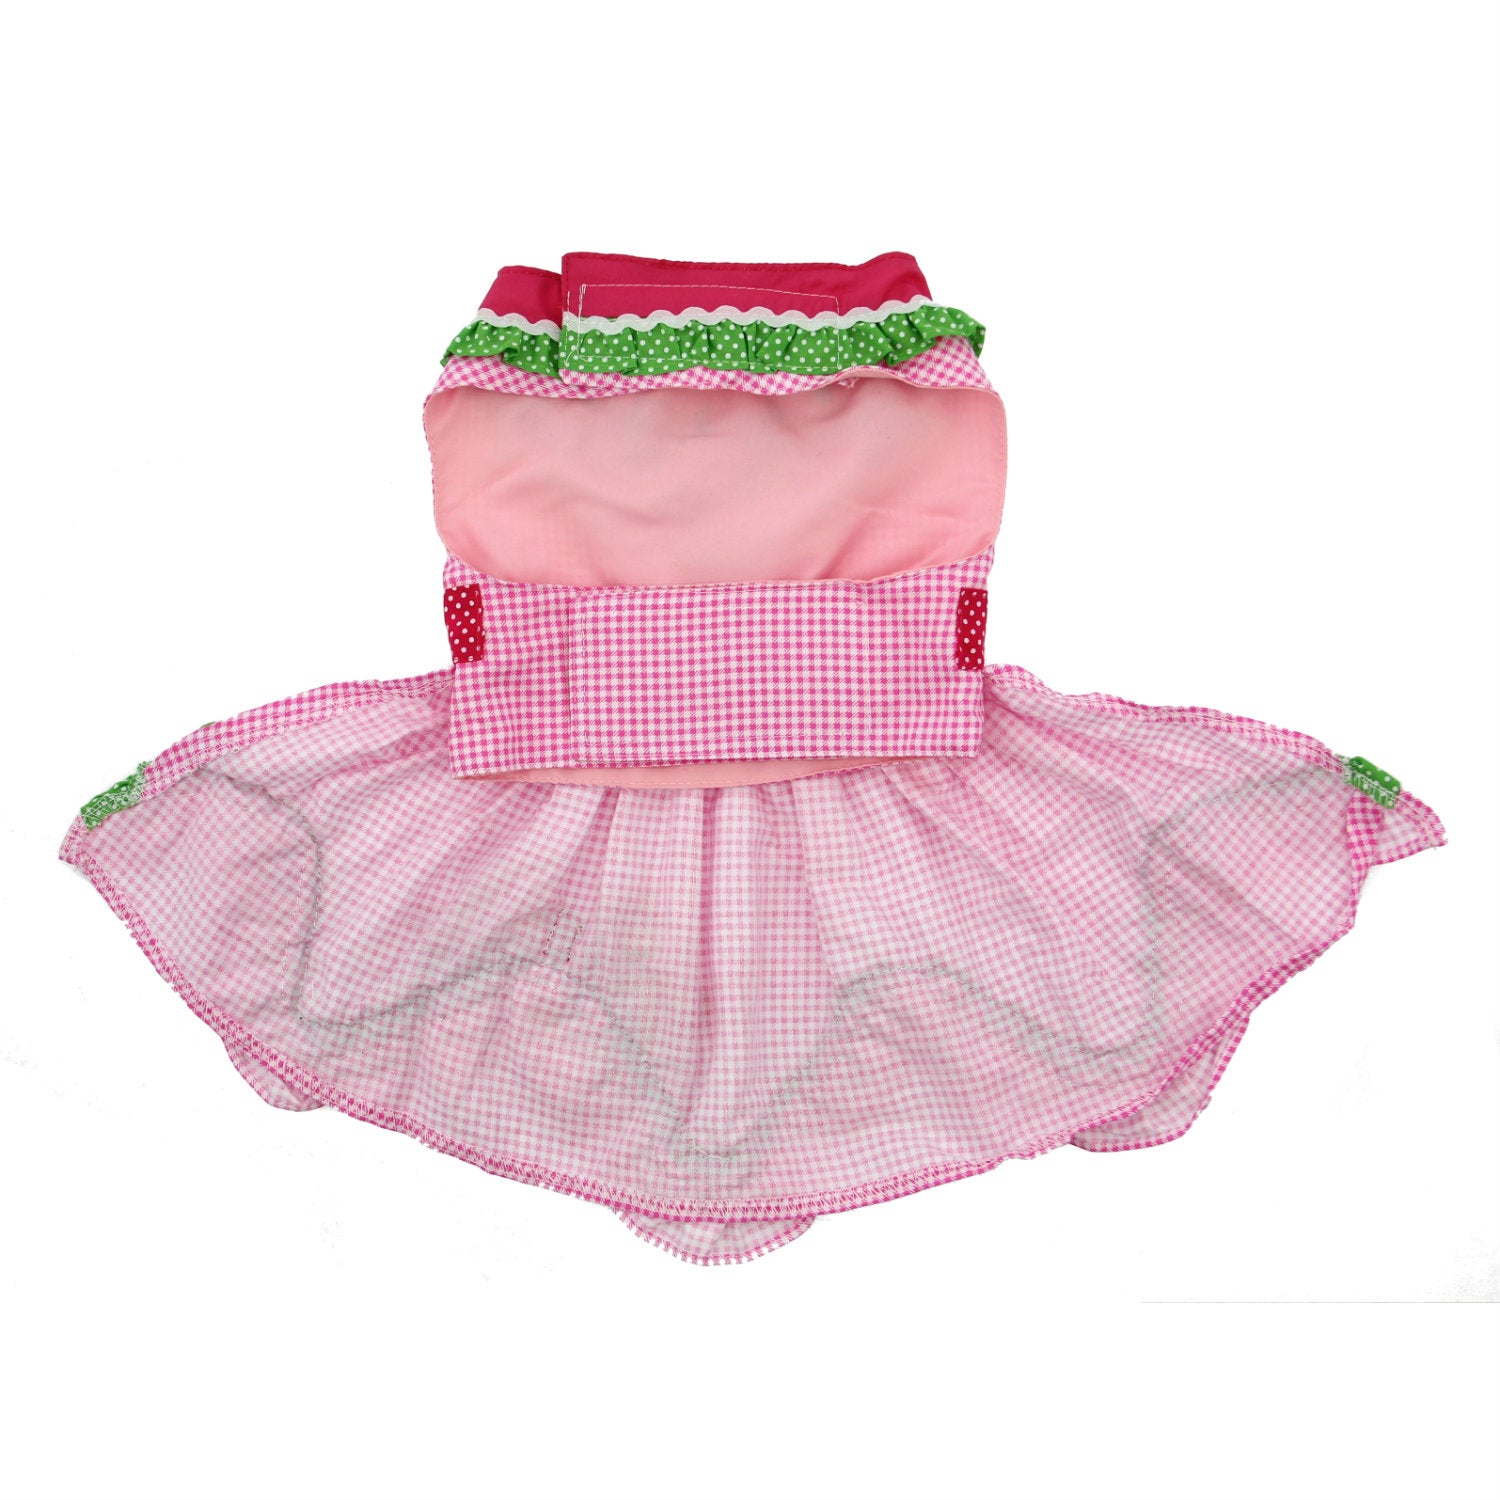 Watermelon Dog Harness Dress with Matching Leash - Trendy Dog Boutique